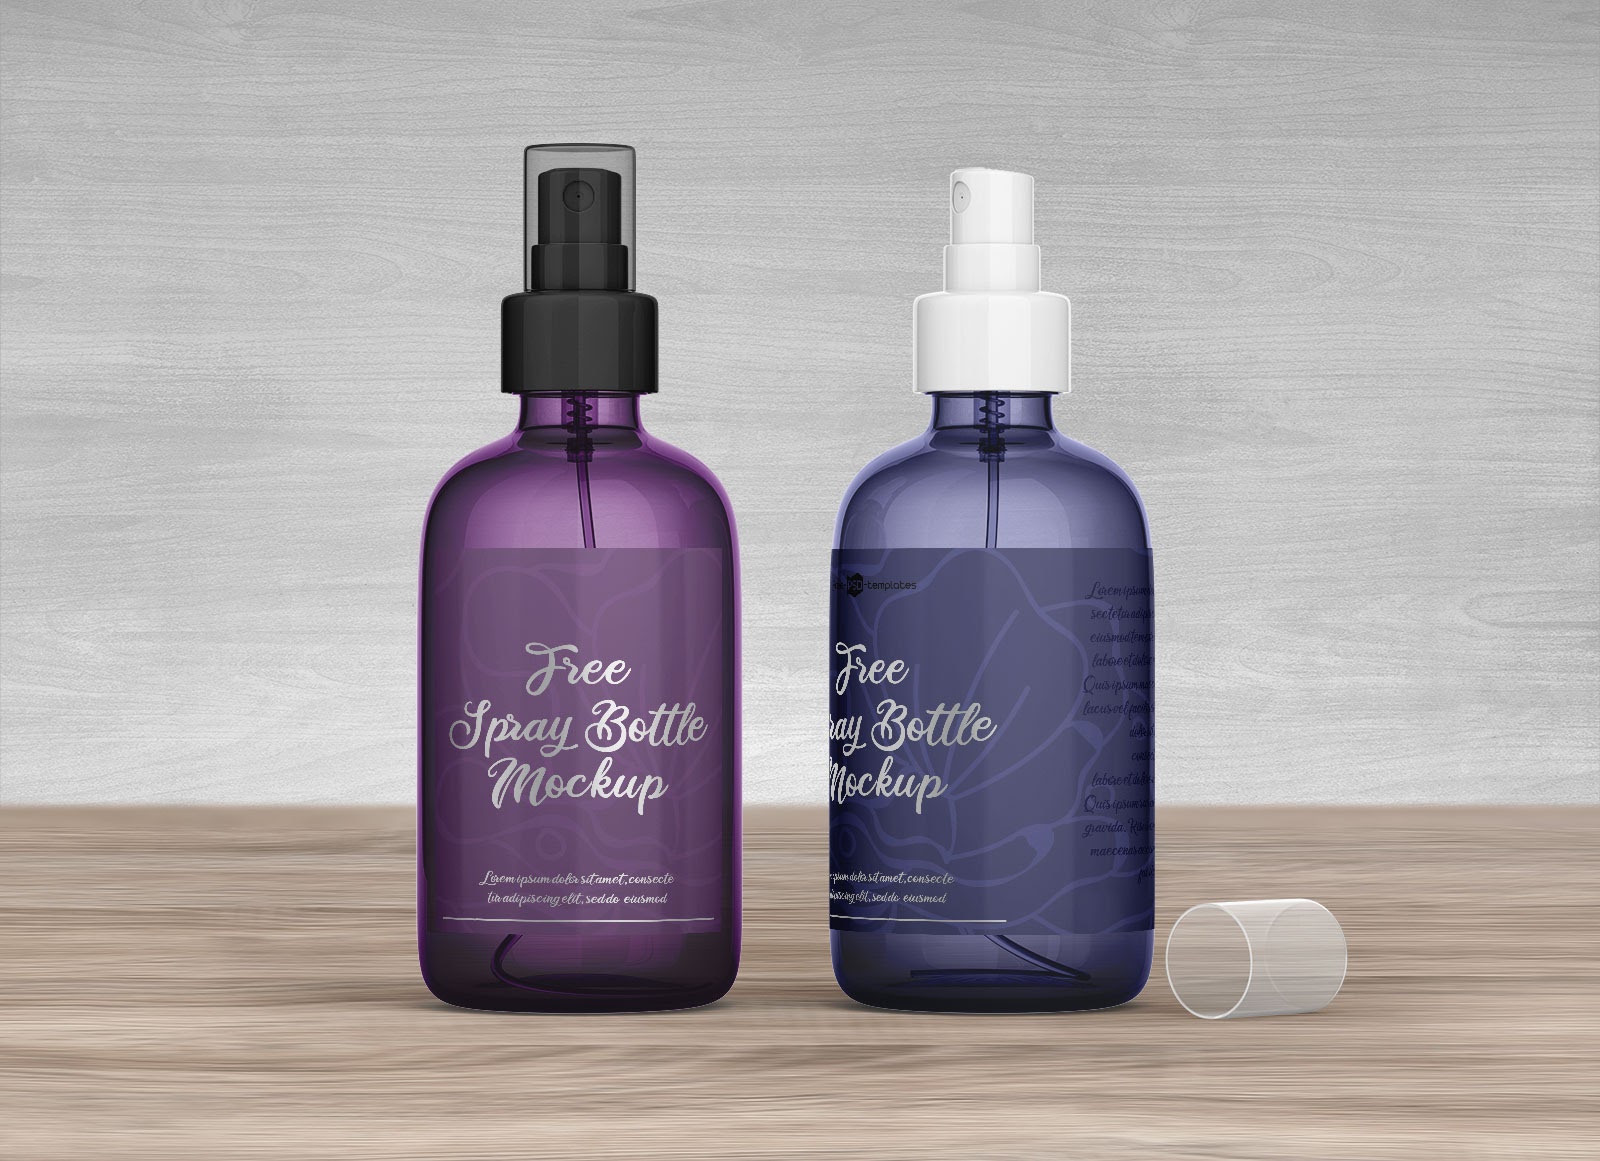 Download Clear Spray Bottle Mockup Free - Free Layered SVG Files - Mockups Design is a site where you can ...